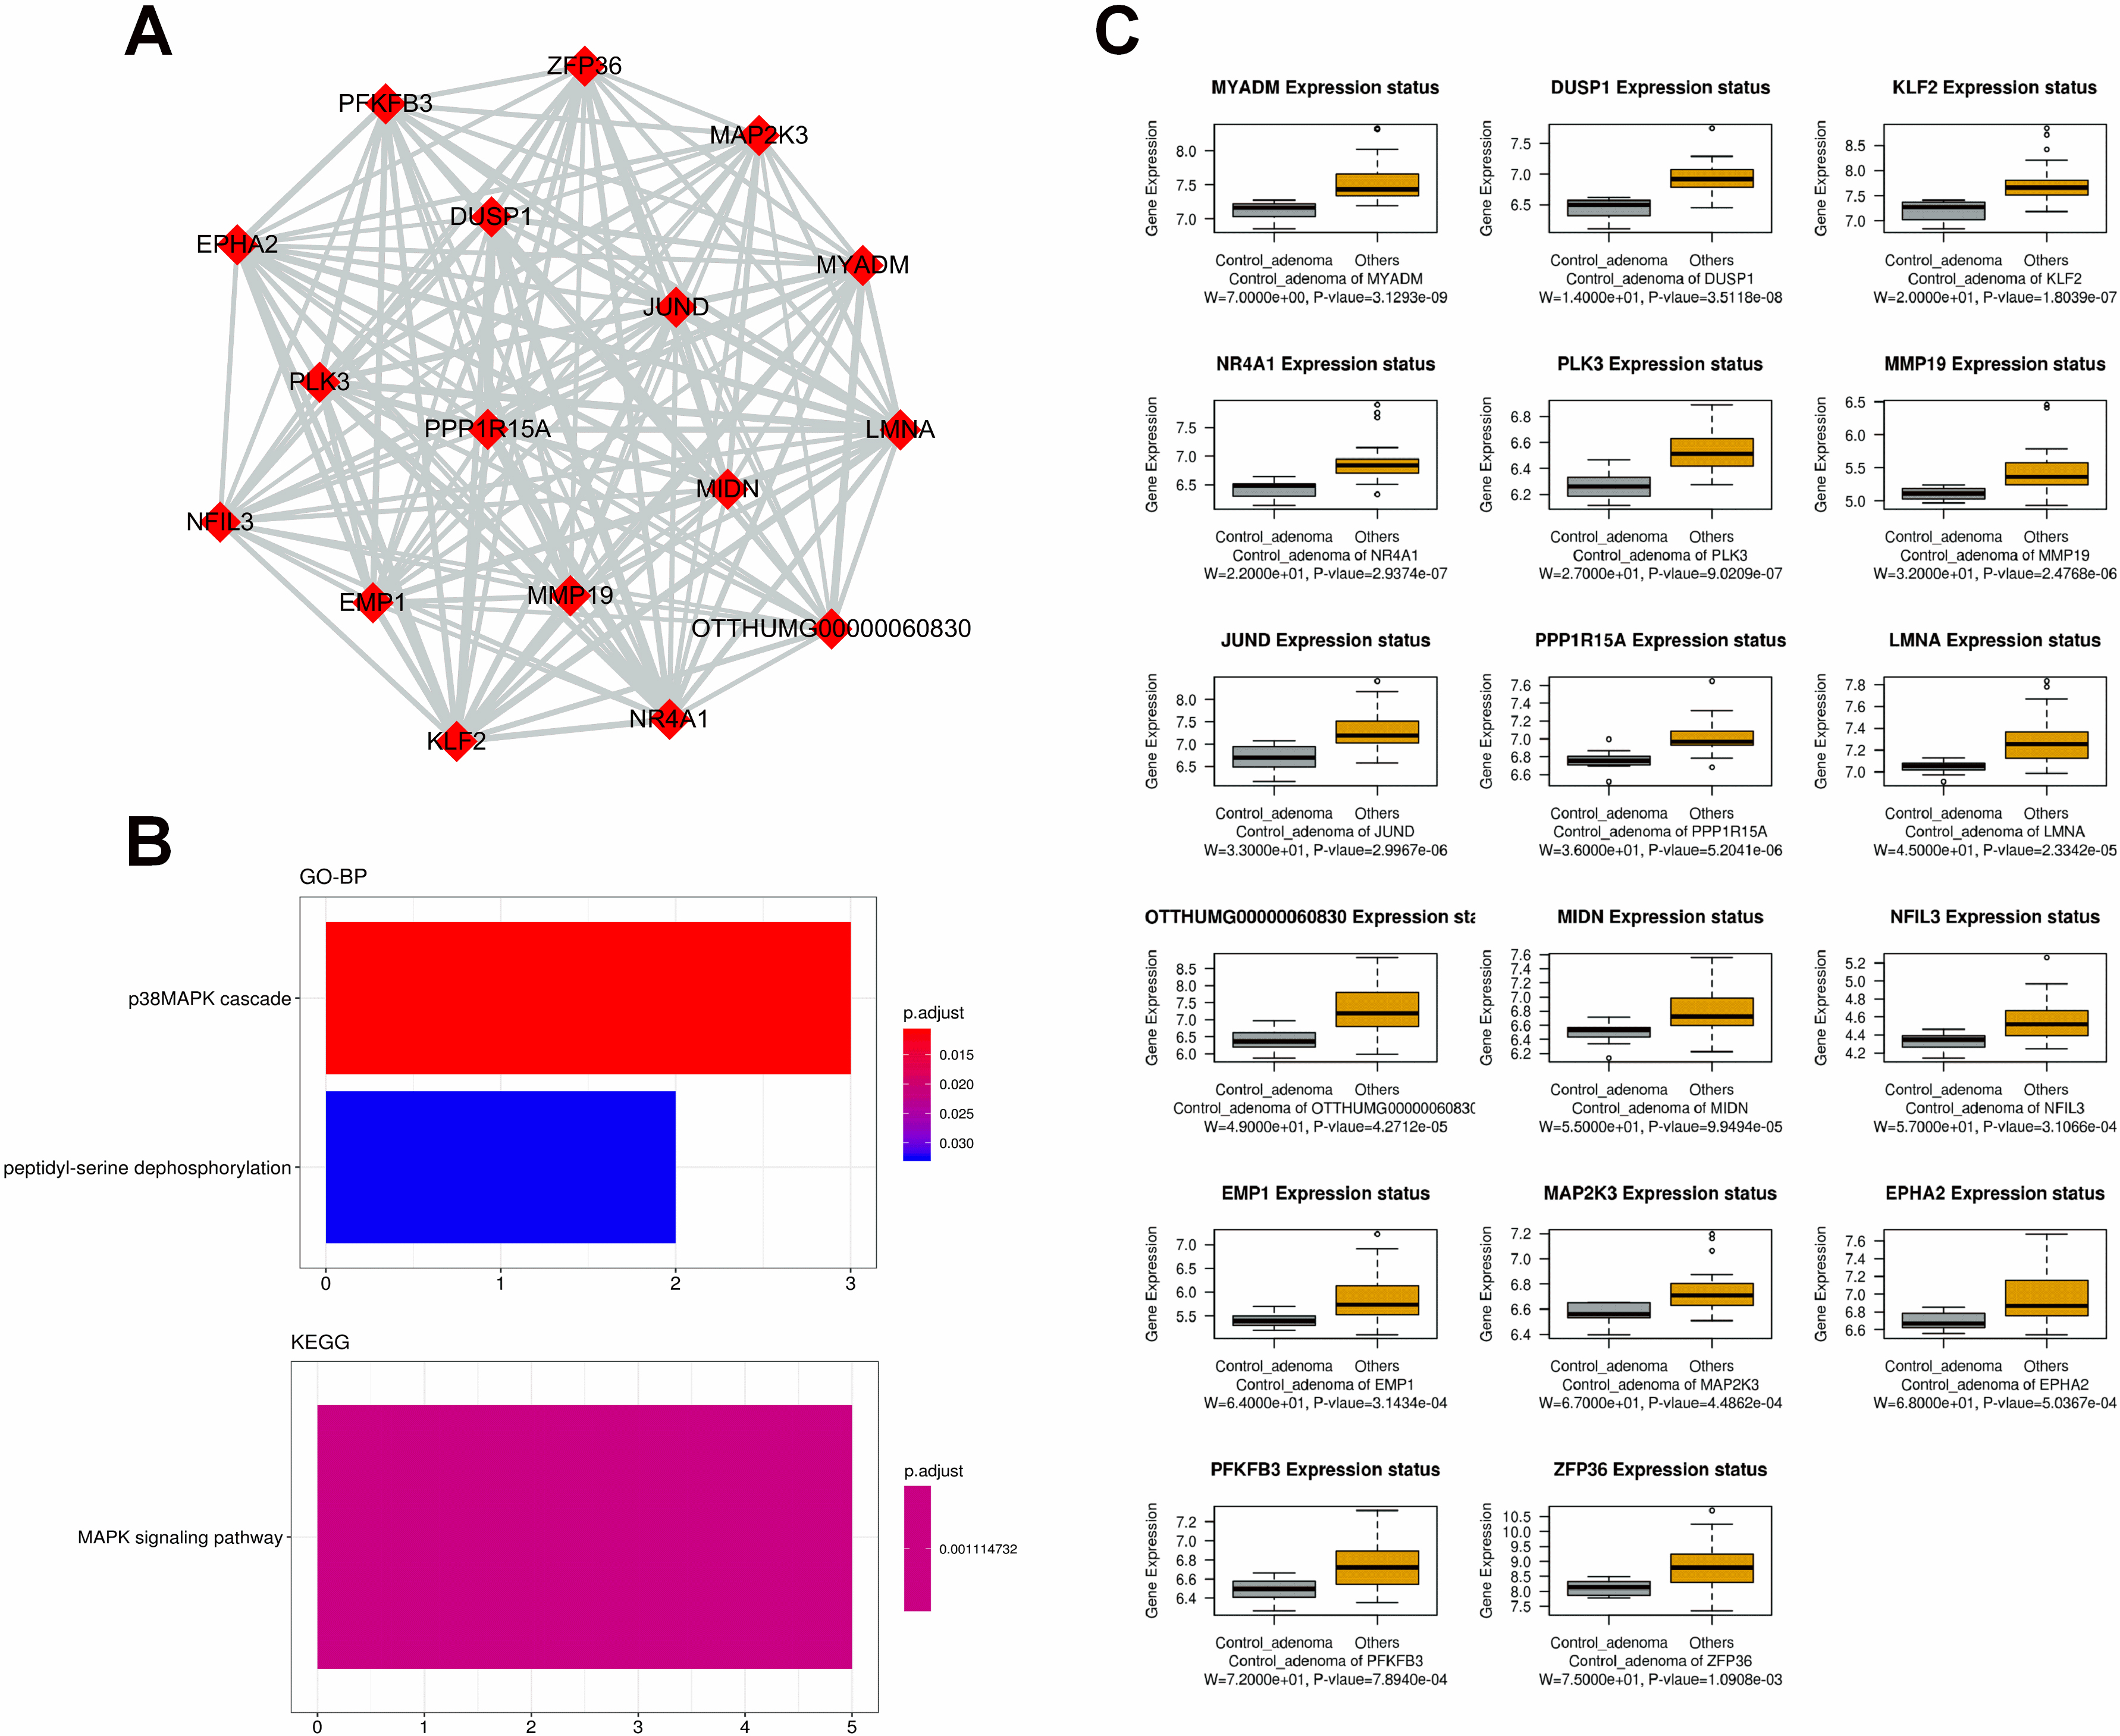 The identification and further analysis of hub genes in midnight blue module. (A) Genes network with 136 edges and 17 nodes, red points represented hub genes [17]; (B) Functional annotation for hub genes associated with control ademona, including Biological process GO terms and KEGG analysis; (C) Boxplots for the expression of hub genes in control ademona vs. FAP.